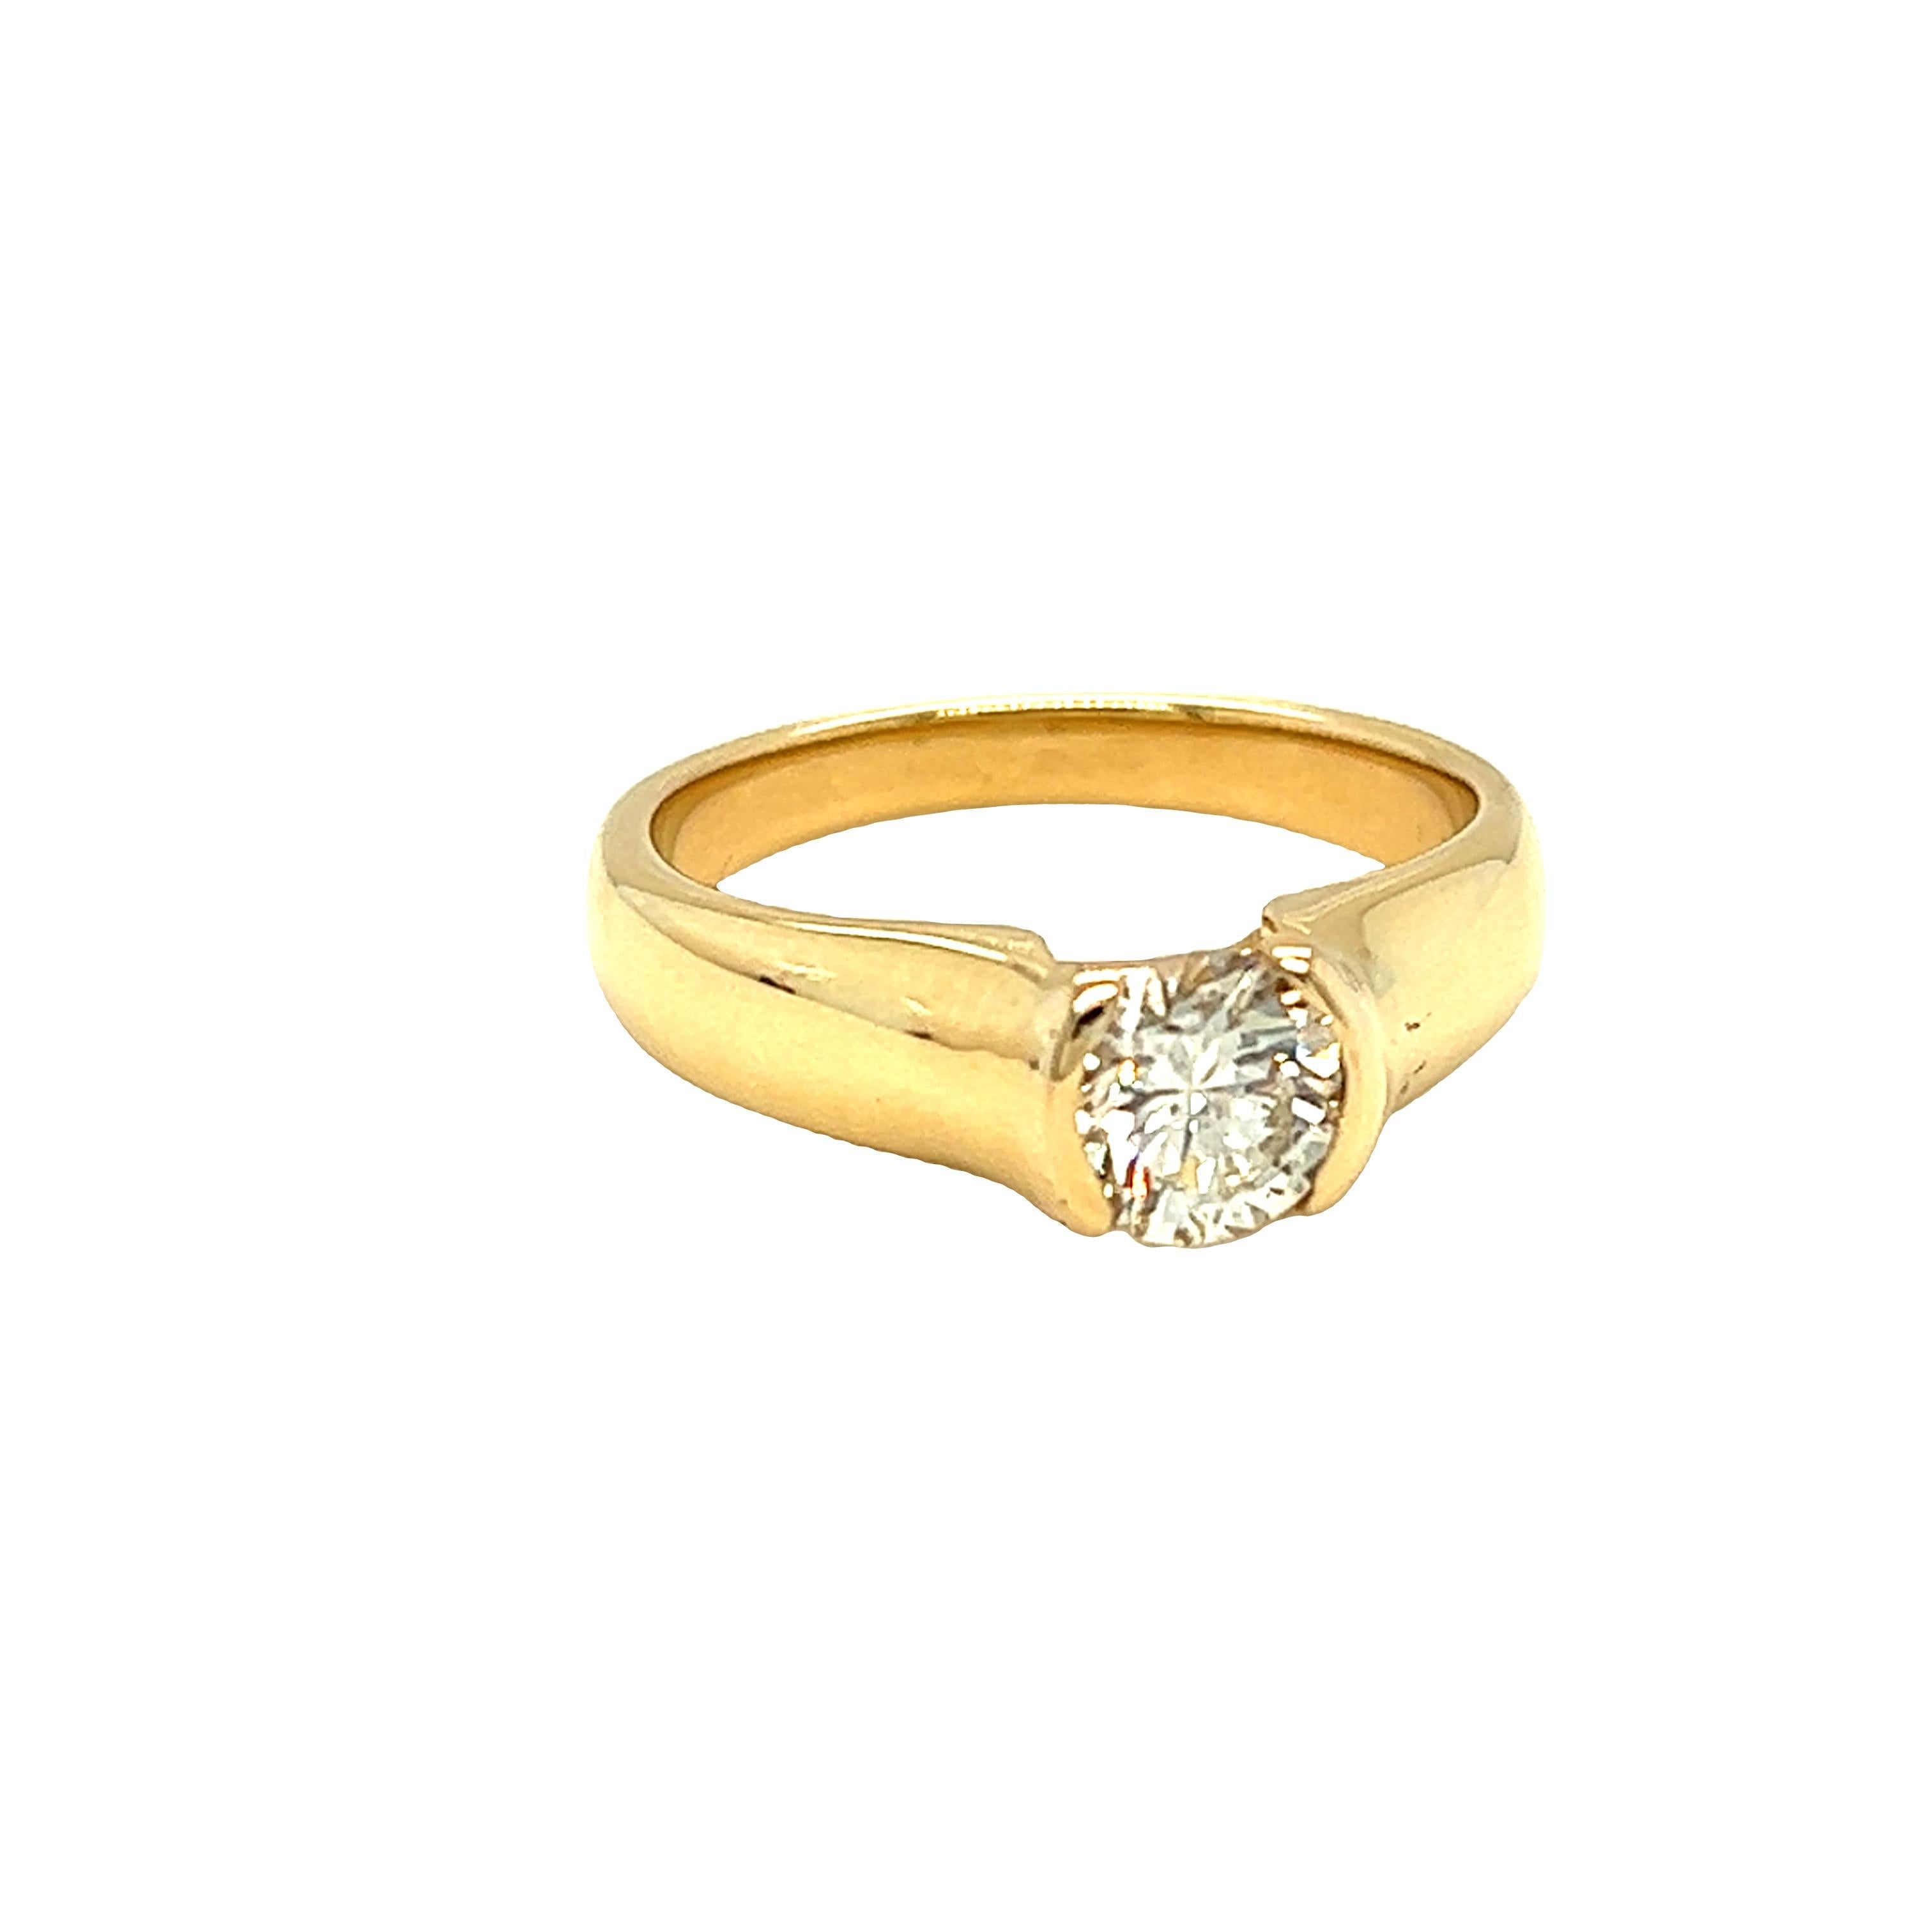 Modern and sleek. This engagement ring boasts 0.80 carat round brilliant solitaire in a semi-bezel setting showing off the diamond's brilliant facets. It’s an elegant combination of features that creates a ring in the solitaire tradition, but with